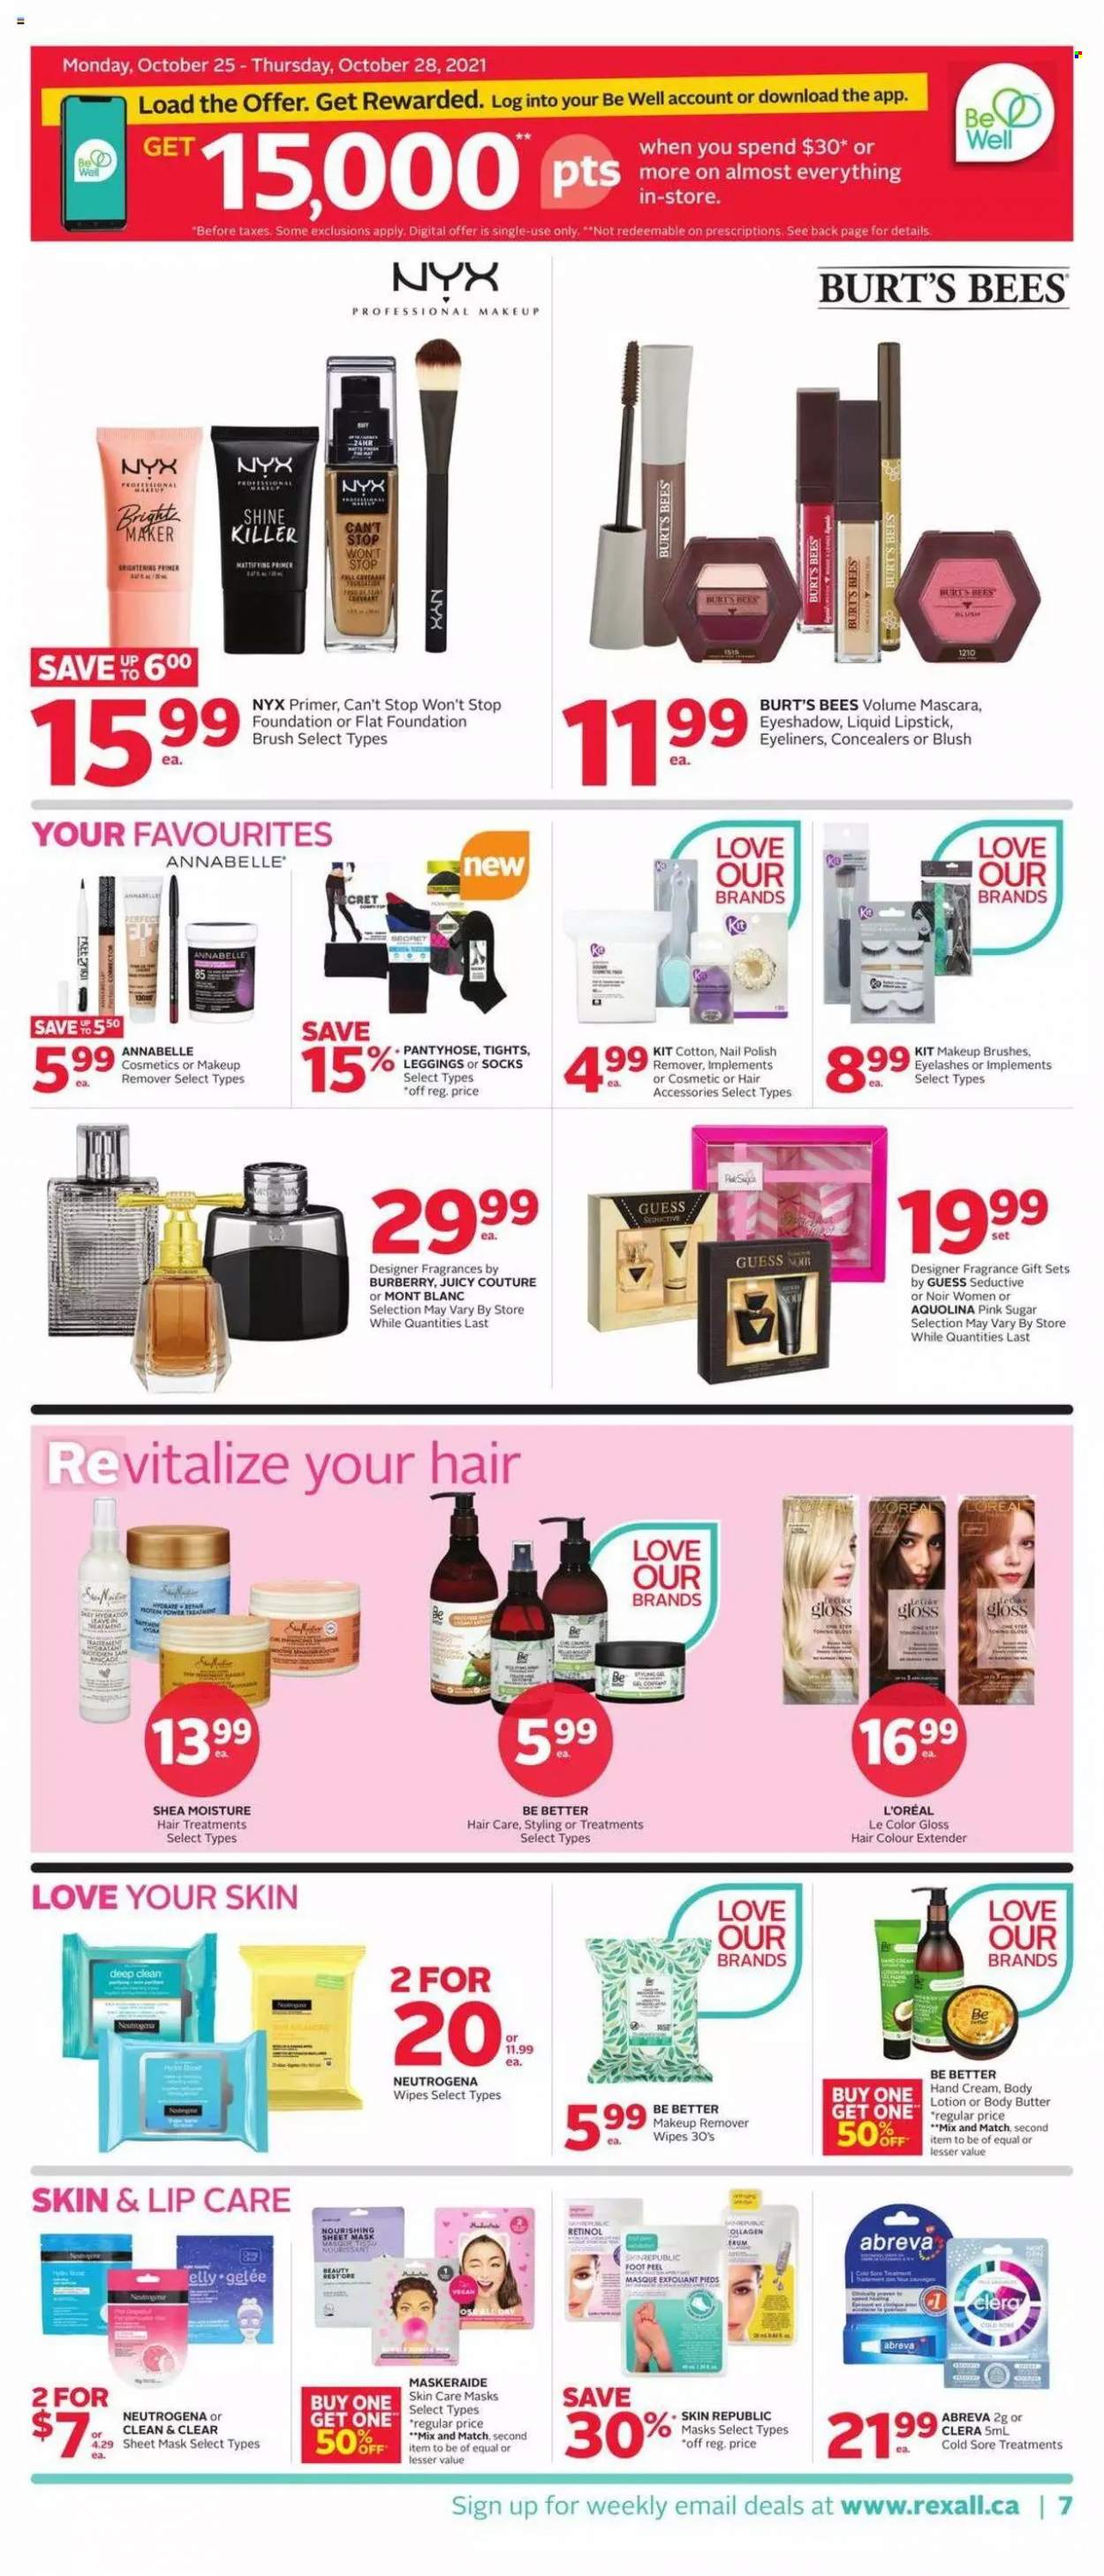 thumbnail - Rexall Flyer - October 22, 2021 - October 28, 2021 - Sales products - sugar, wipes, Abreva, L’Oréal, NYX Cosmetics, Clean & Clear, hair color, body butter, body lotion, hand cream, fragrance, Guess, nail polish remover, eyeshadow, lipstick, makeup remover, mascara, eyelashes, foundation brush, Burberry, Neutrogena. Page 7.